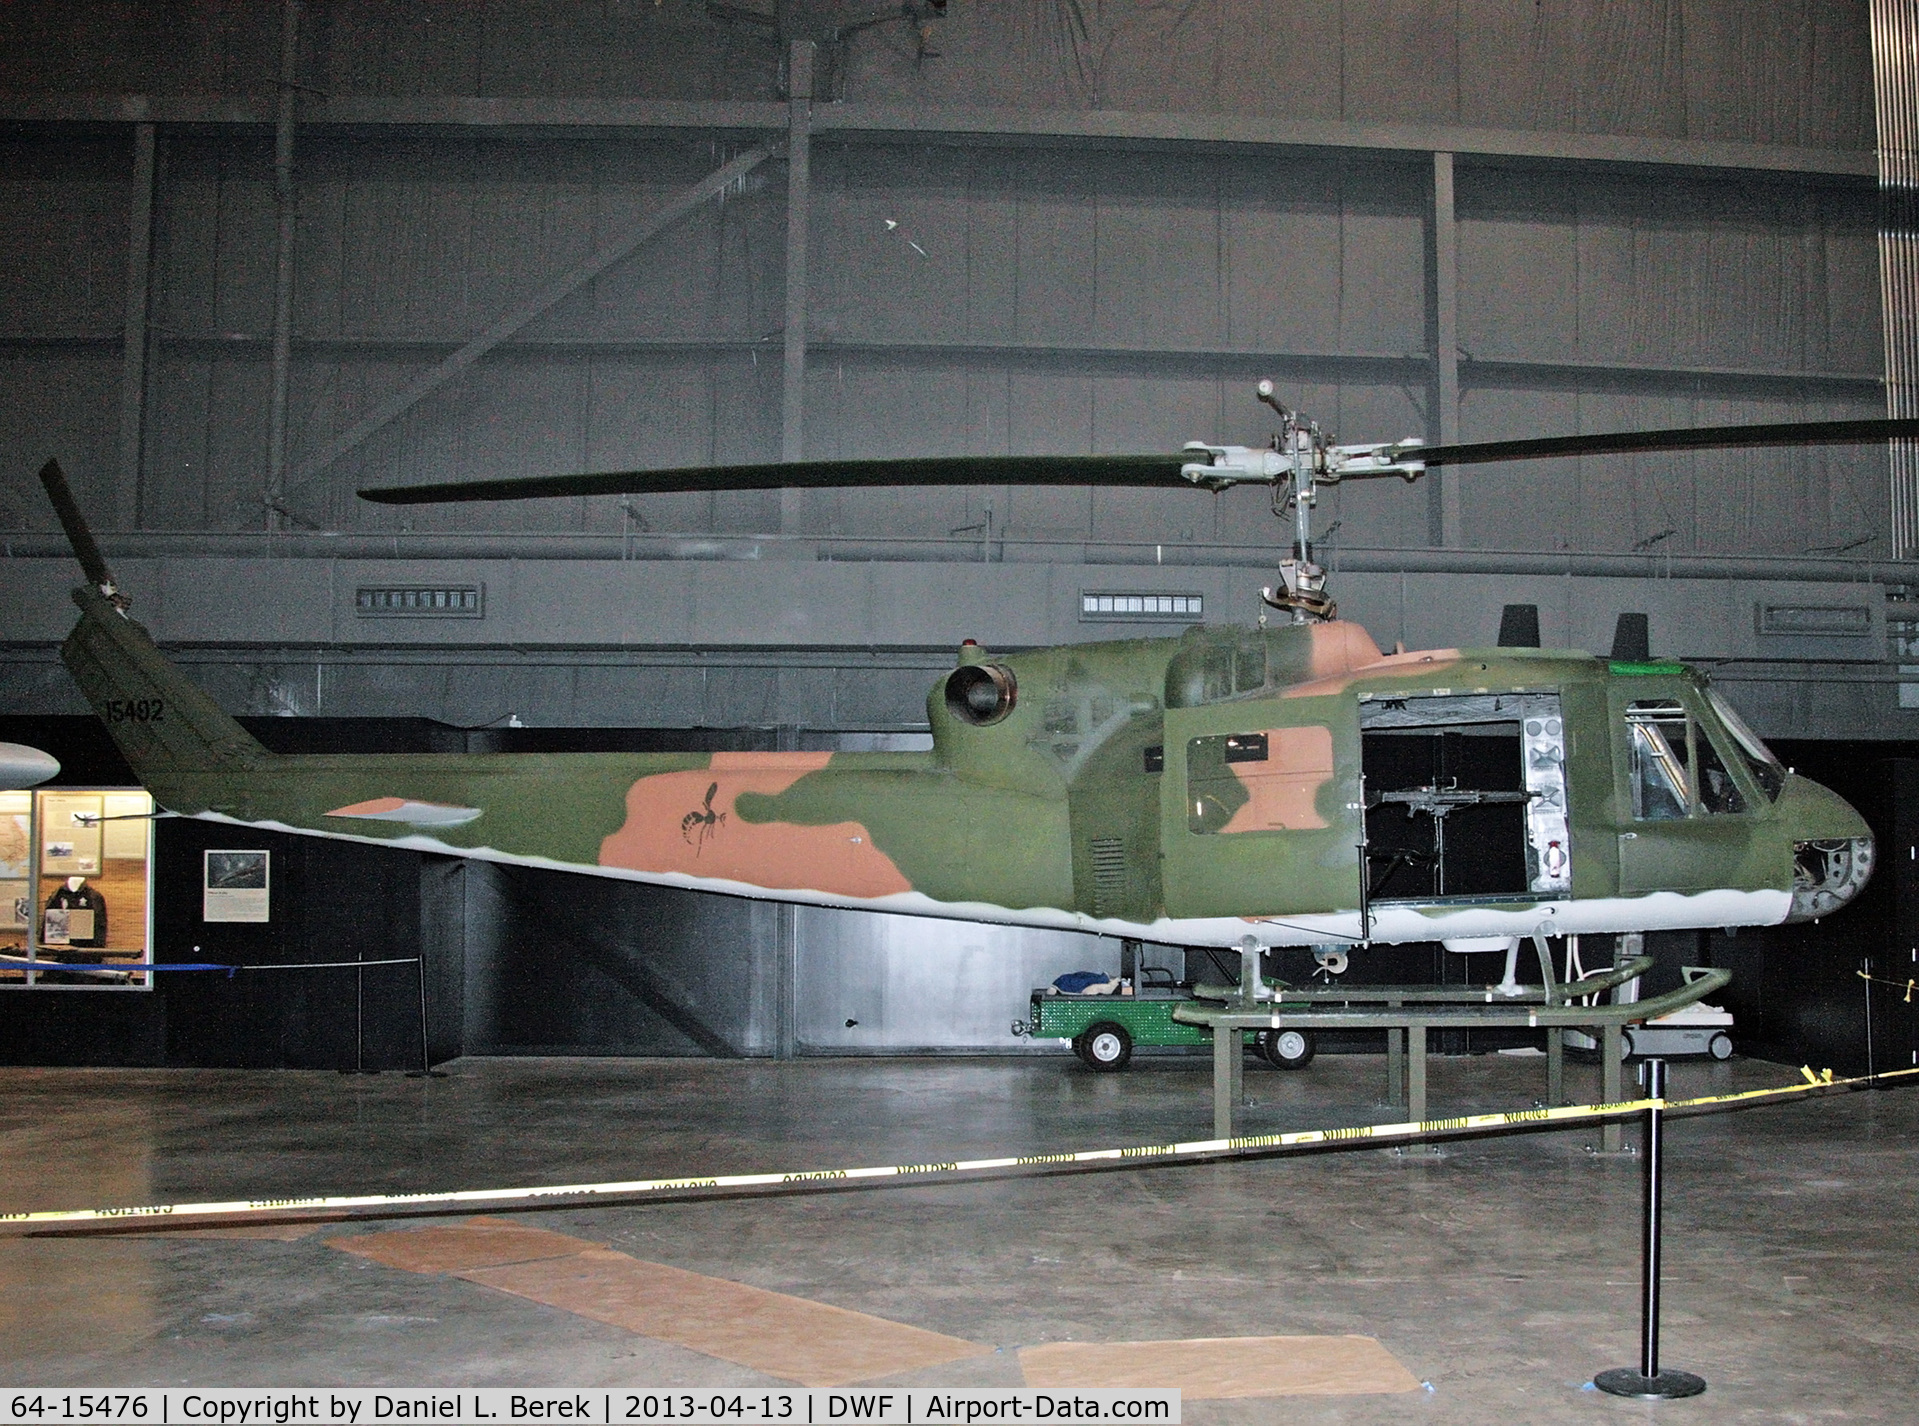 64-15476, 1964 Bell UH-1P Iroquois C/N 7026, The P-suffix was the gunship version of the Huey.